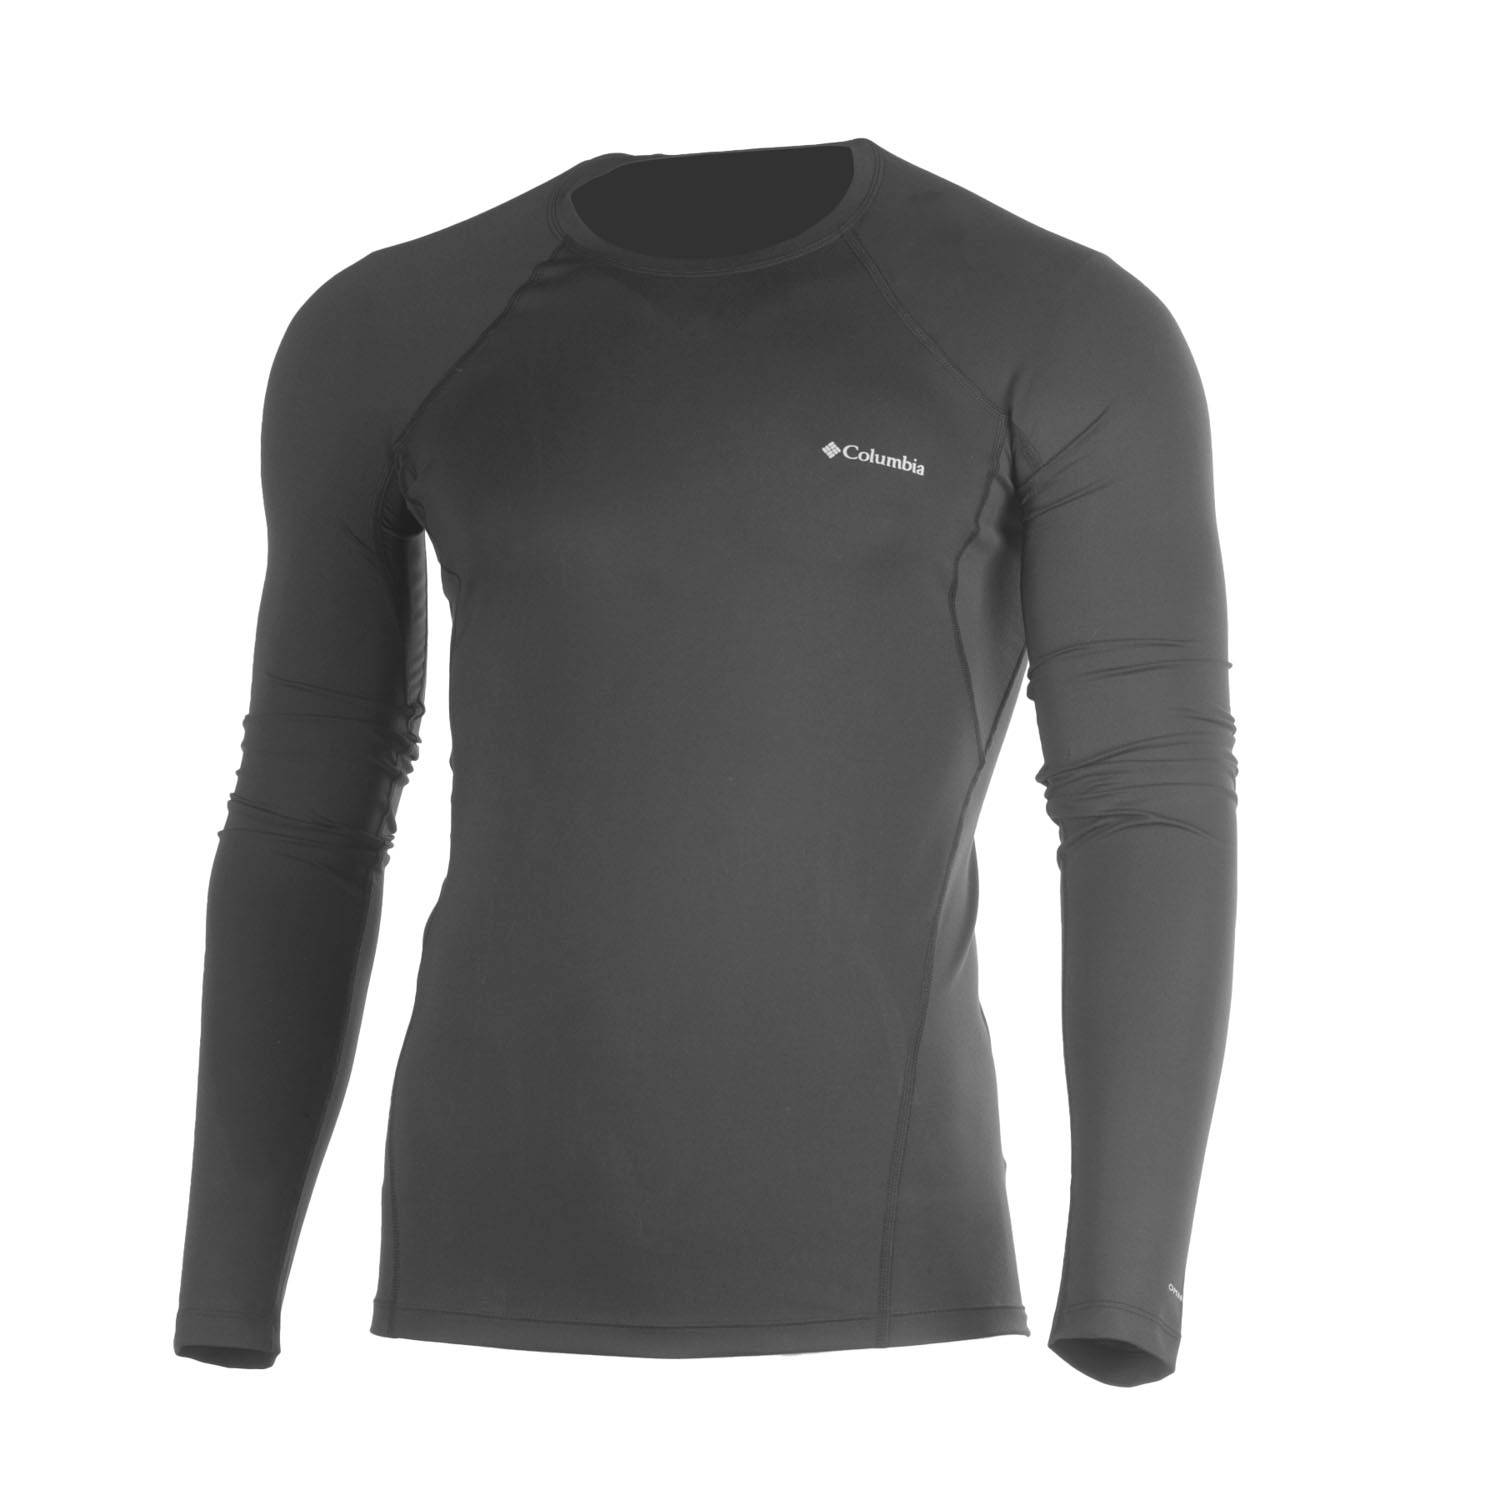 COLUMBIA MIDWEIGHT STRETCH LONG SLEEVE TOP